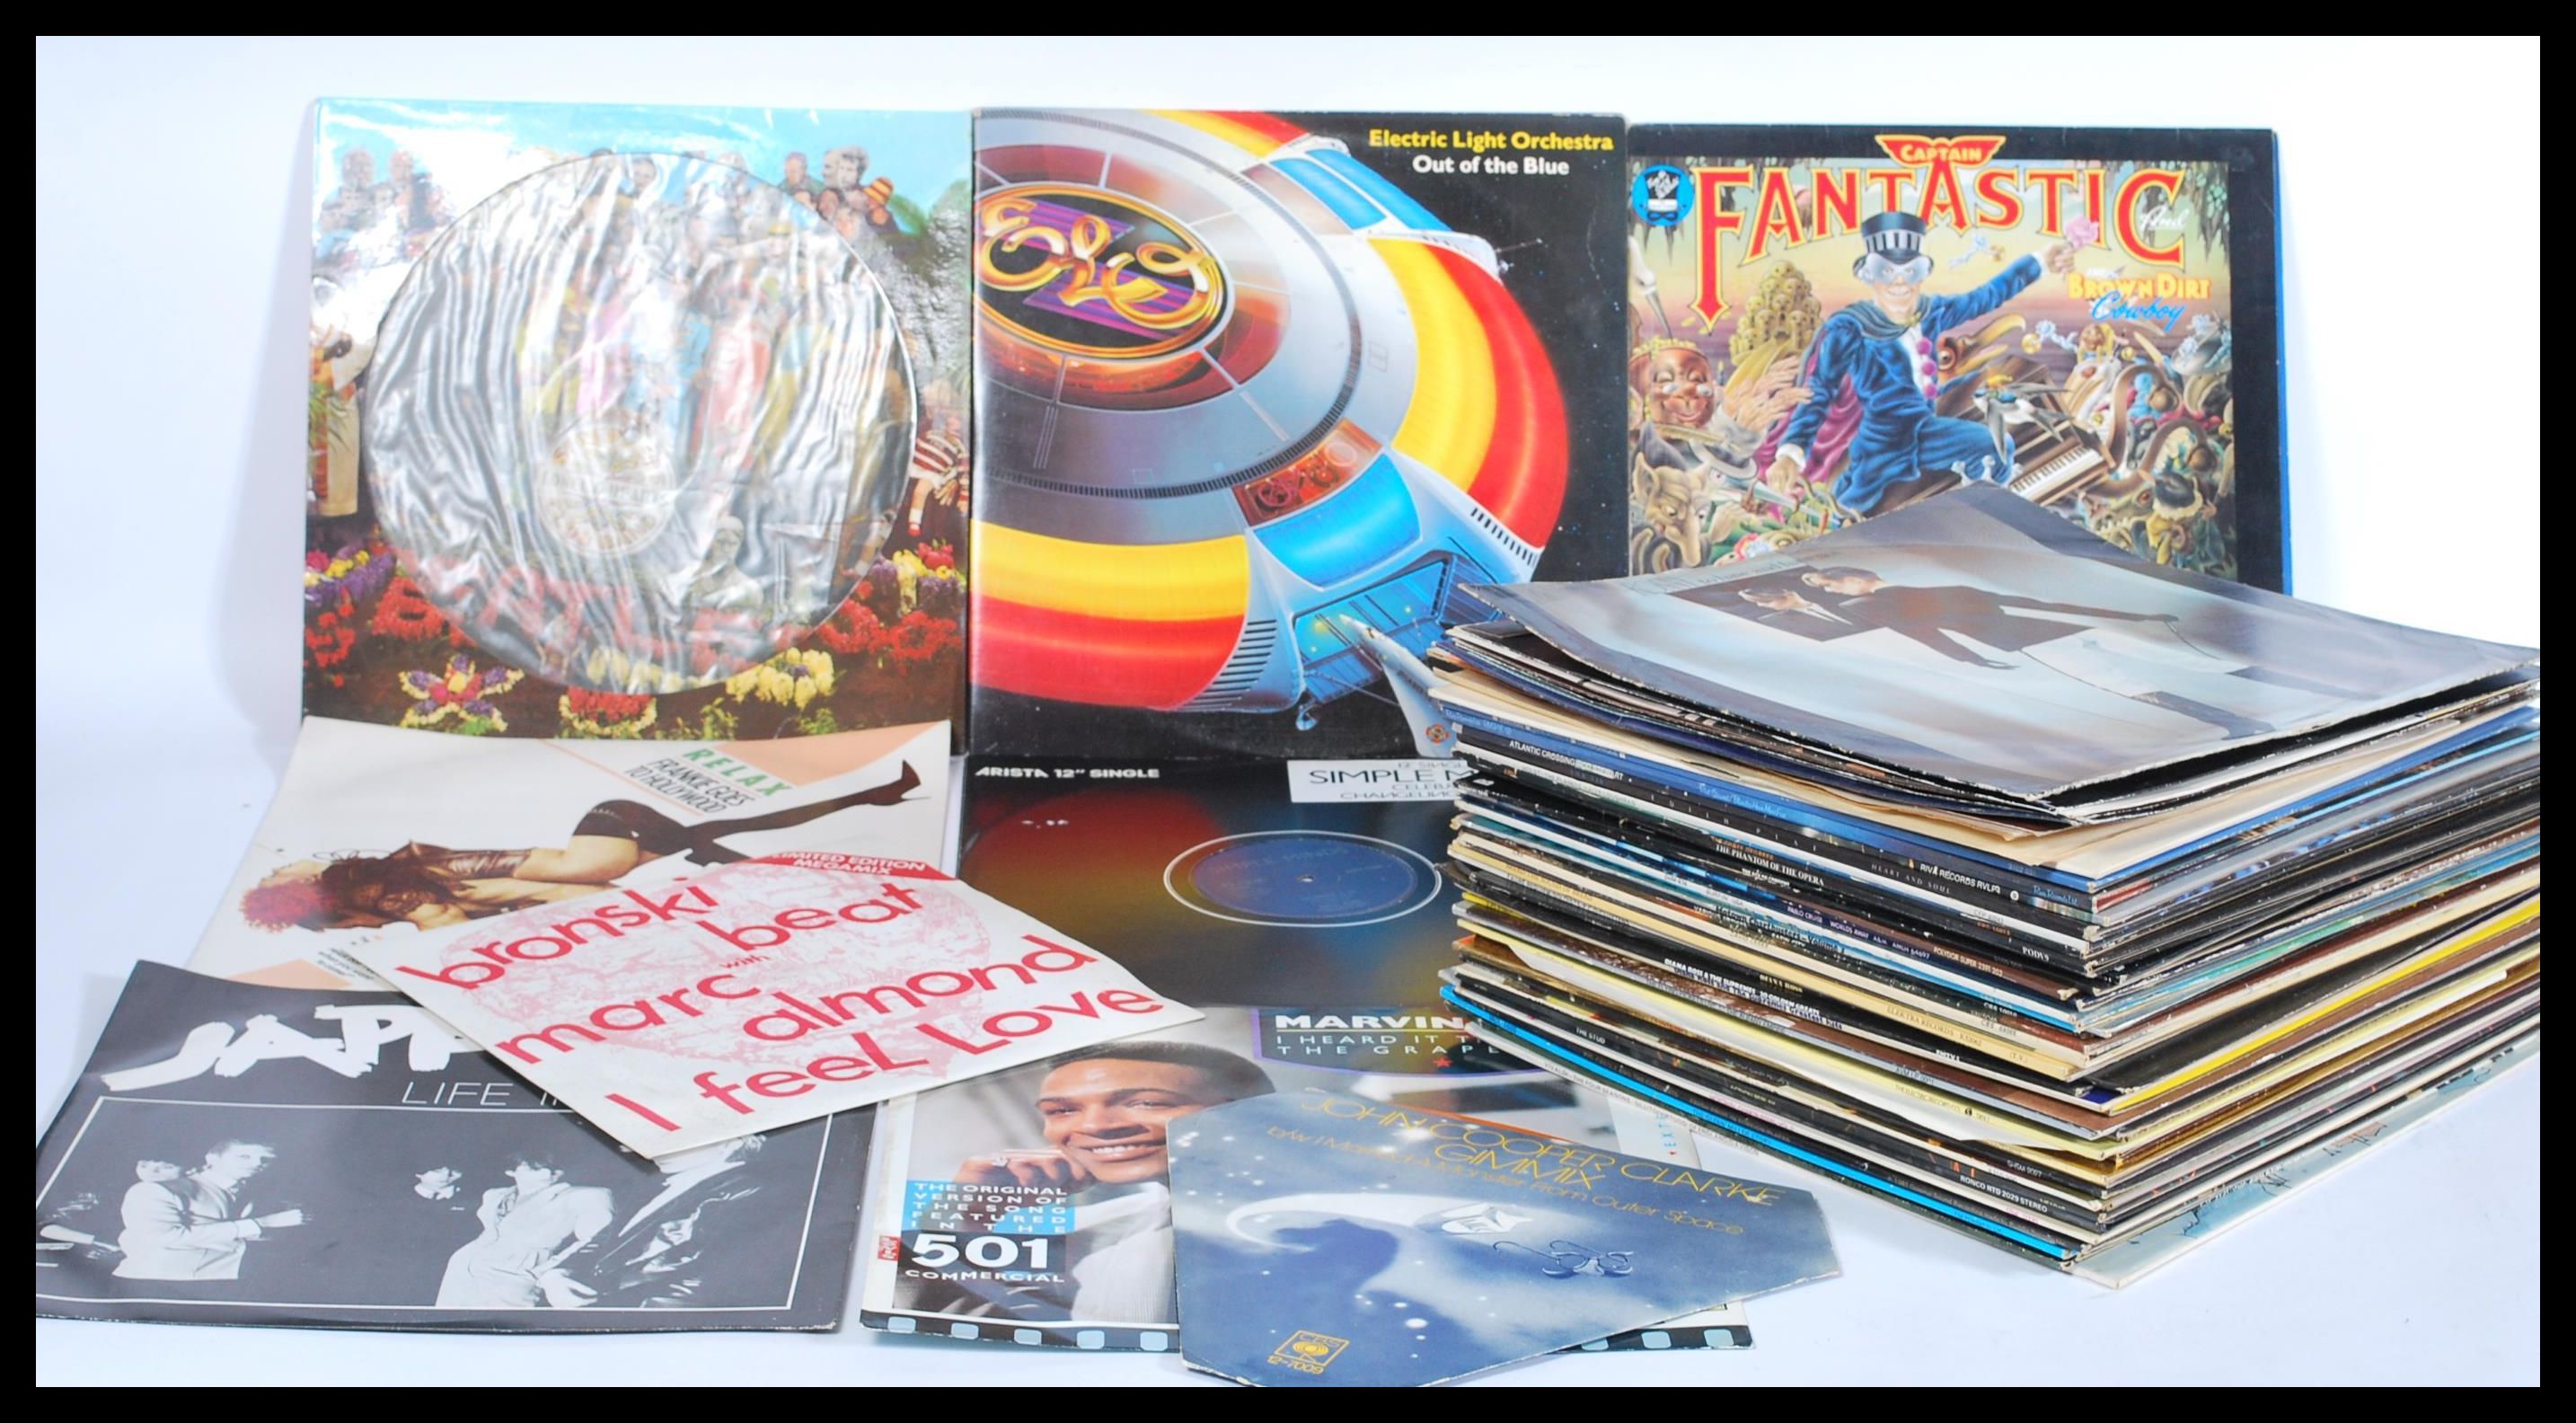 Vinyl Records - A collection of vinyl long play LP and 12" singles featuring various artists to